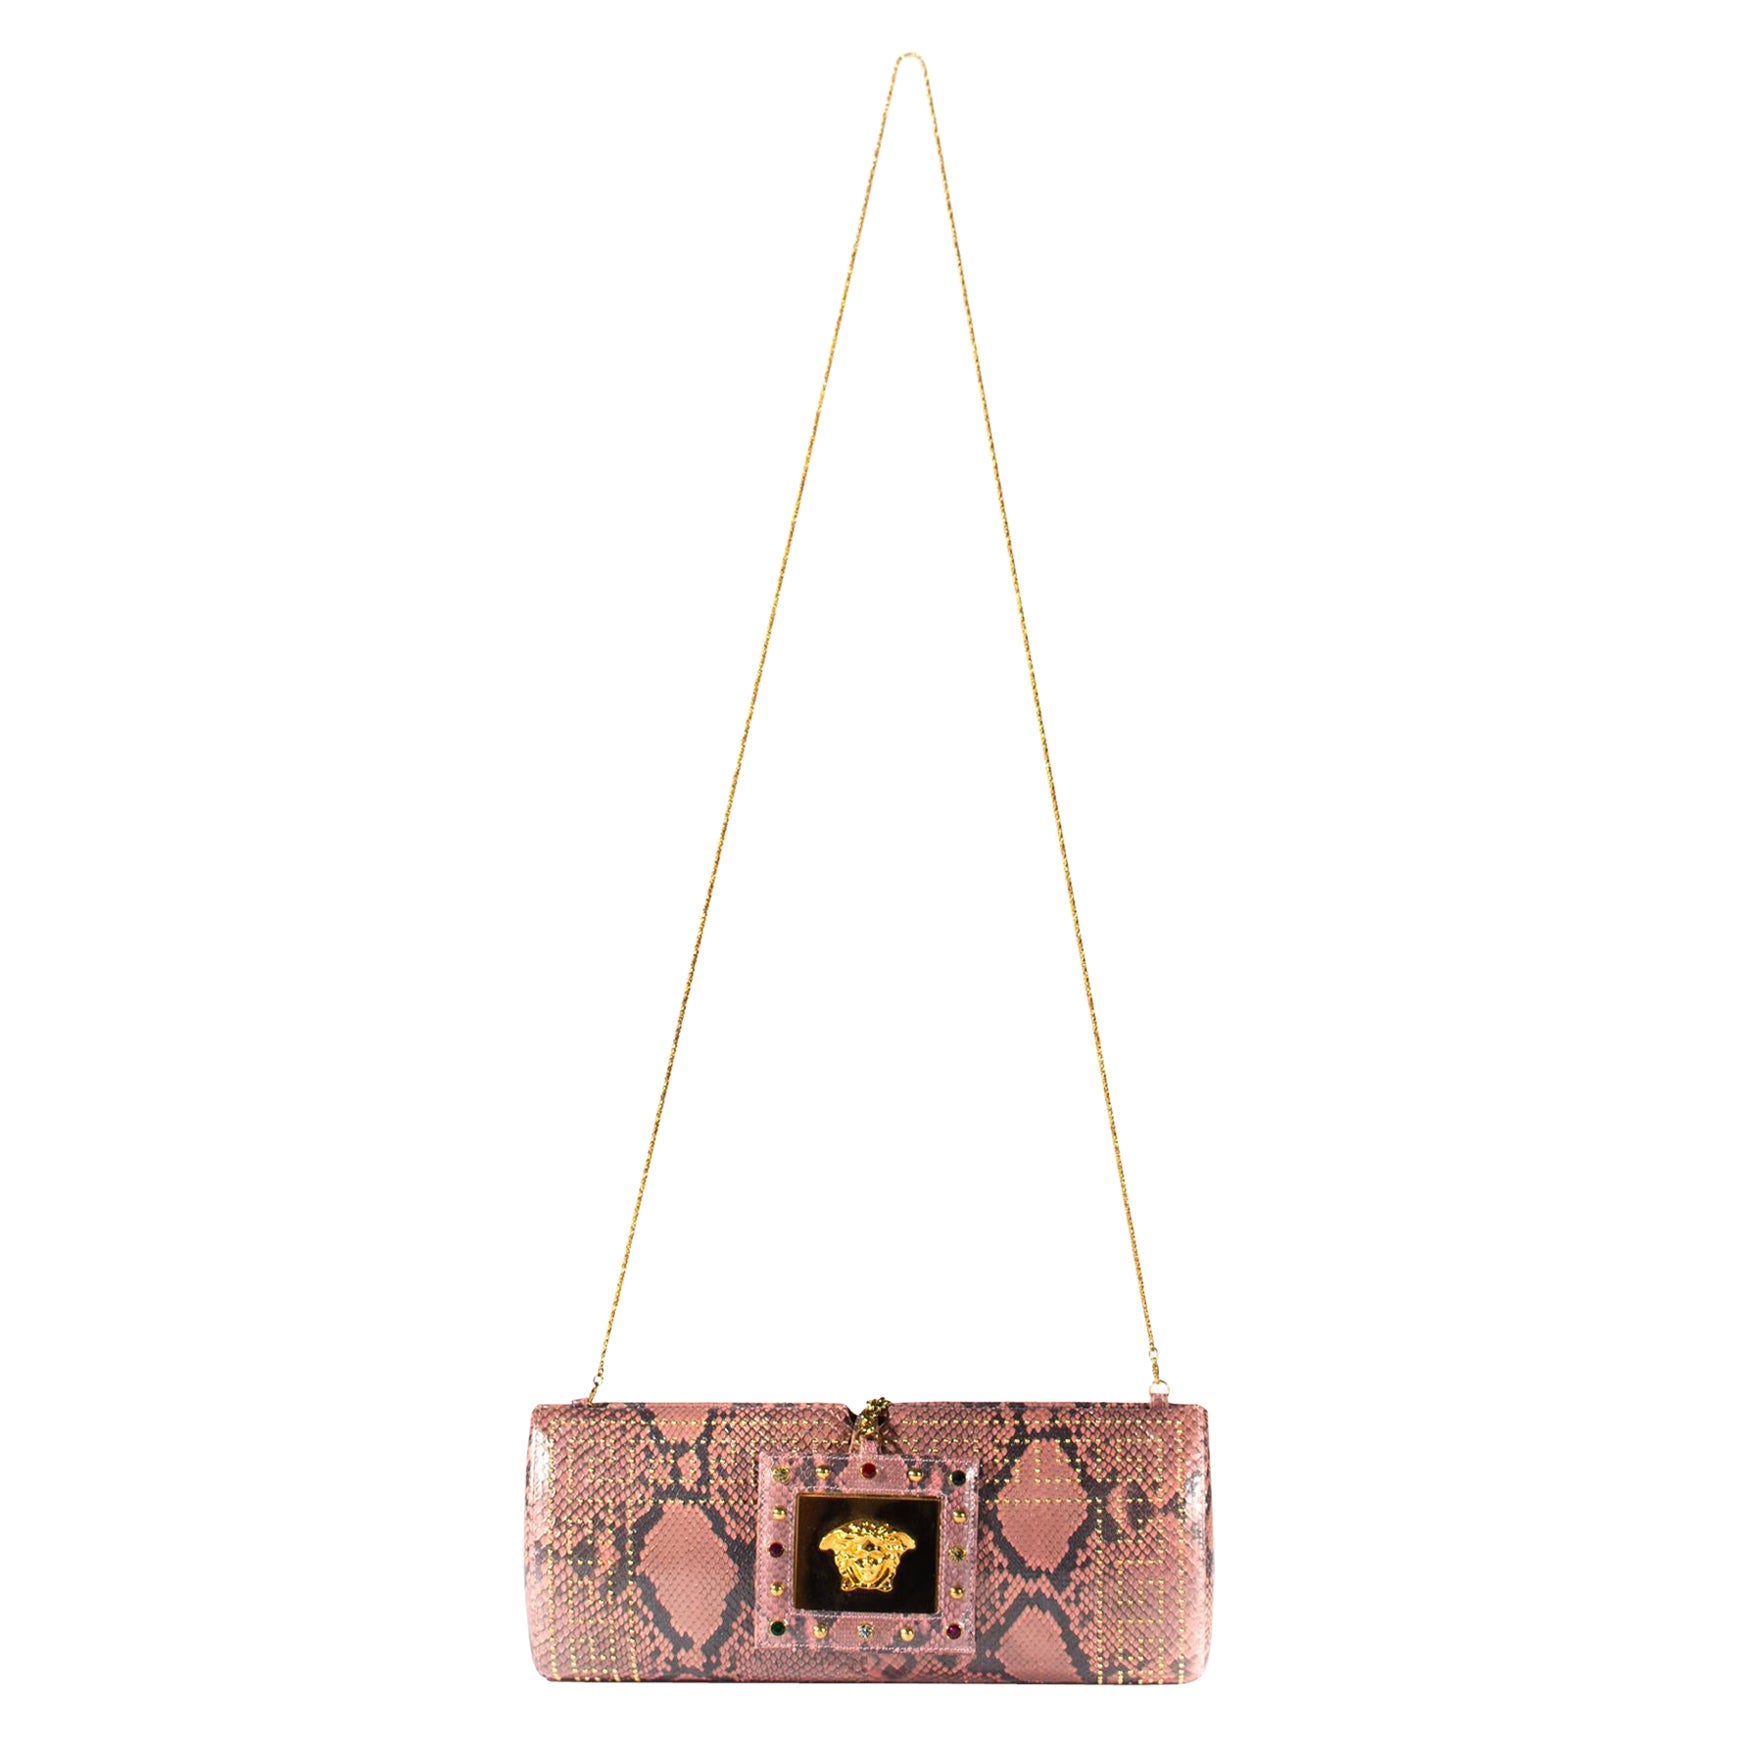 S/S 2000 Gianni Versace Python Pink Convertible Evening Bag & Clutch Donatella For Sale